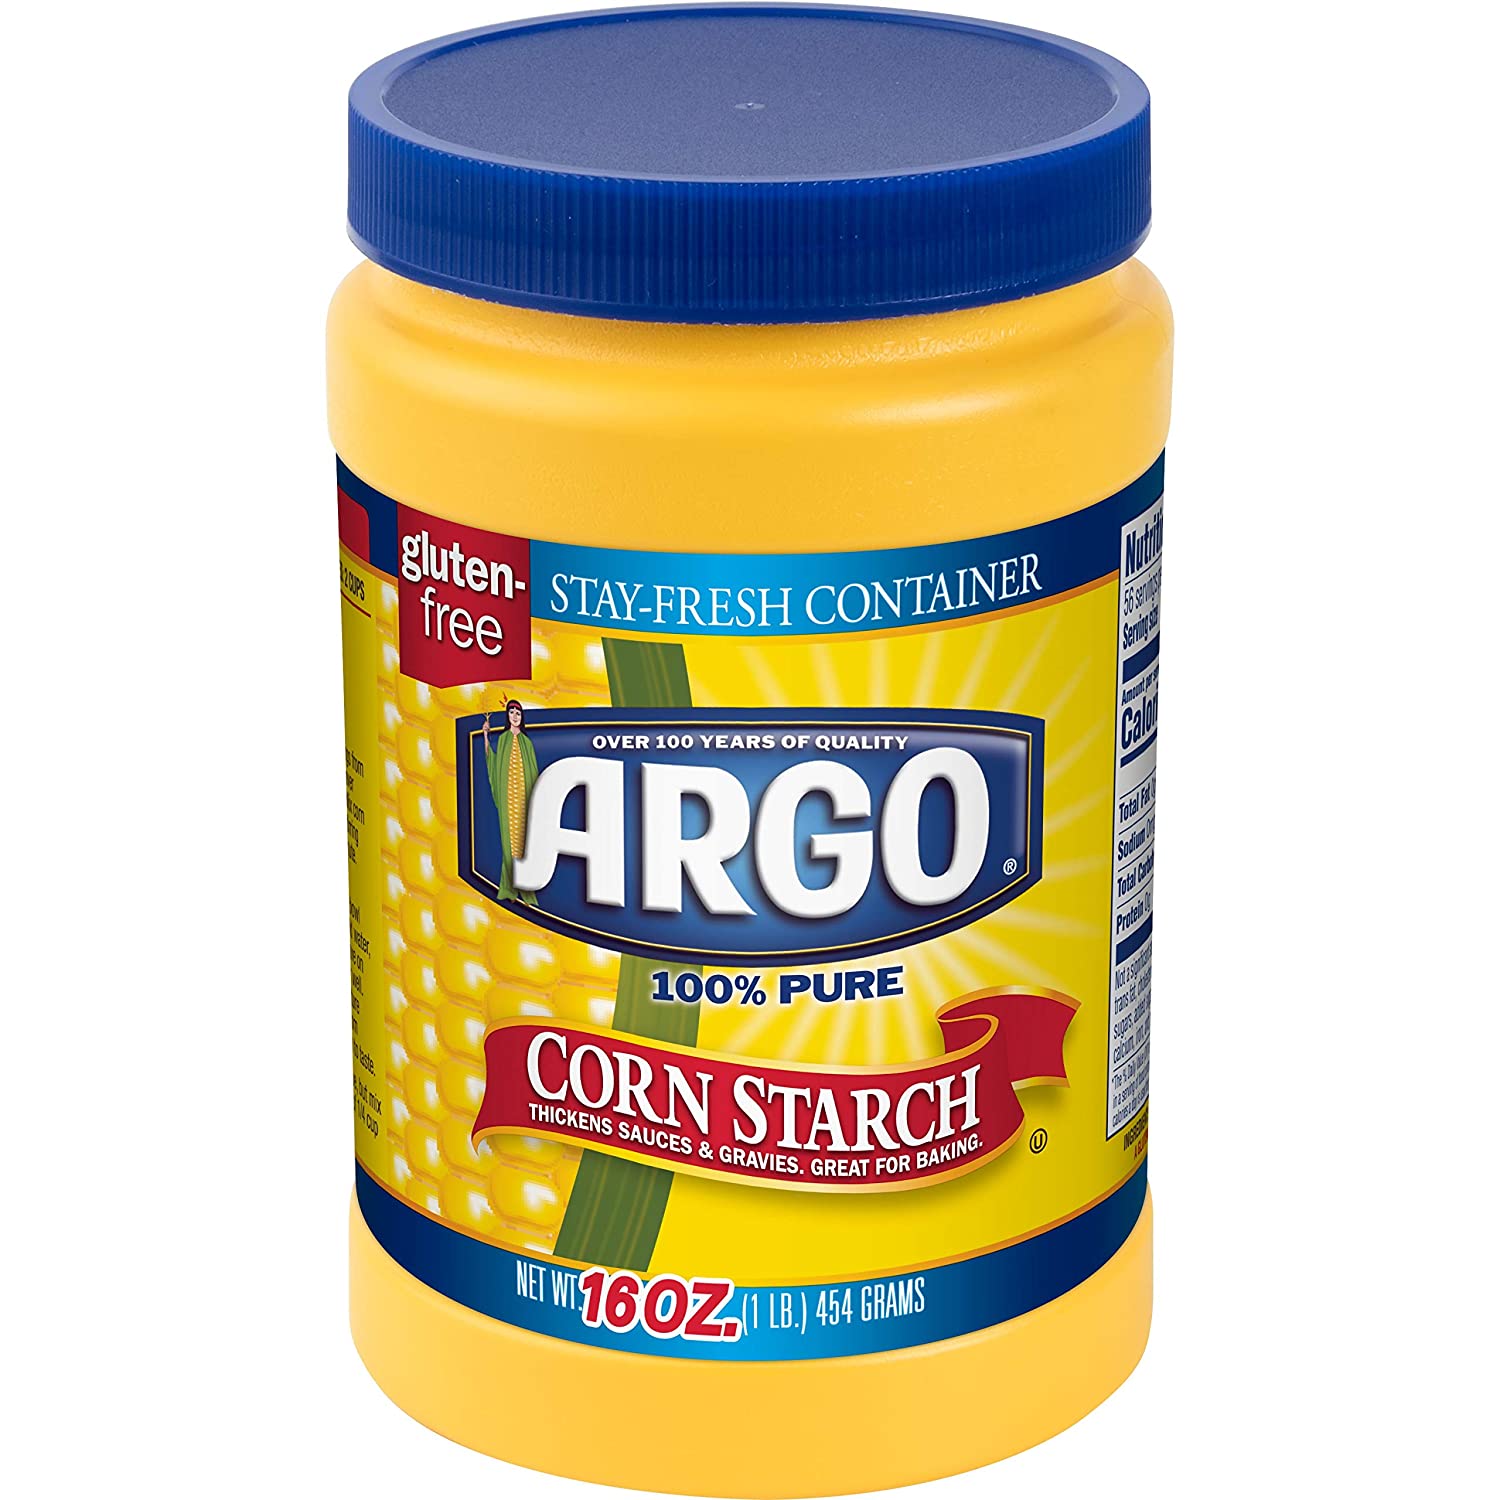 Argo Corn Starch 100% Pure, 16 Oz (Resealable Container)